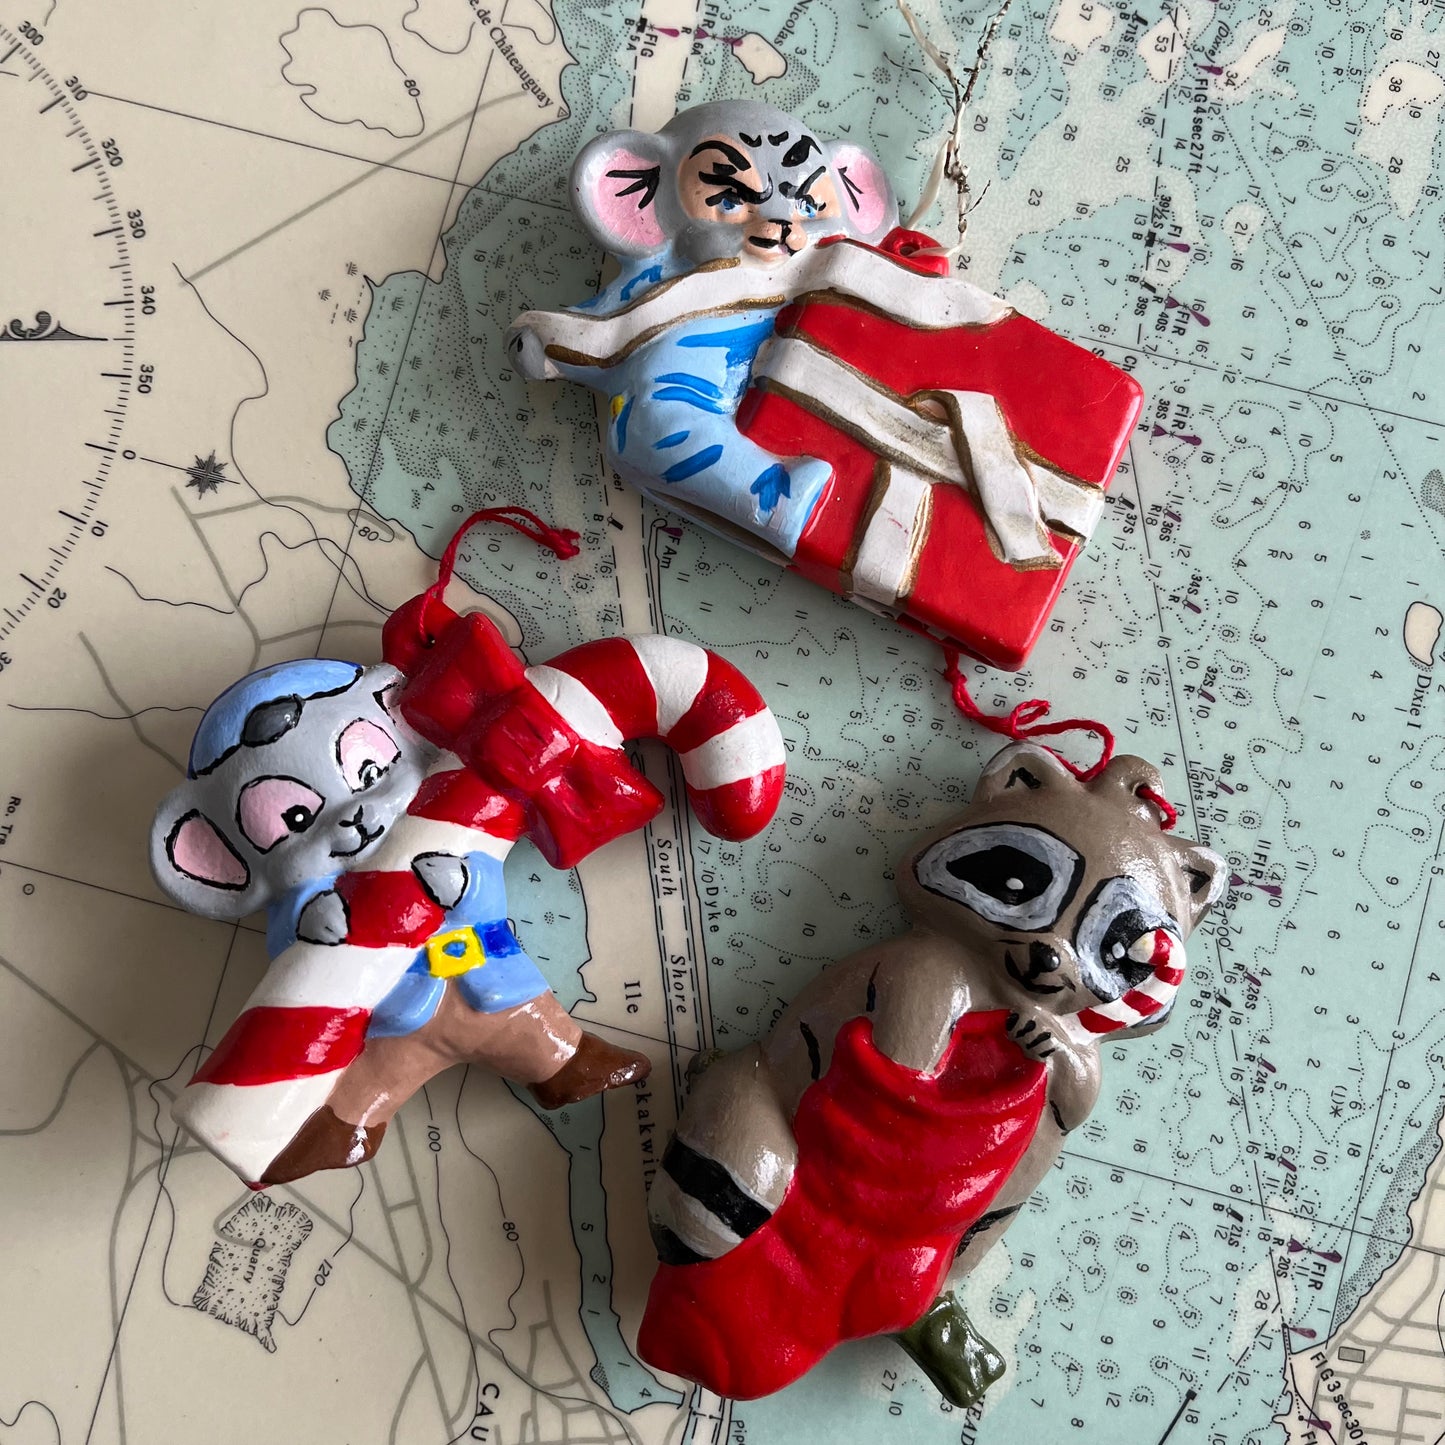 Vintage Hand Painted Ceramic Mouse and Raccoon Ornaments